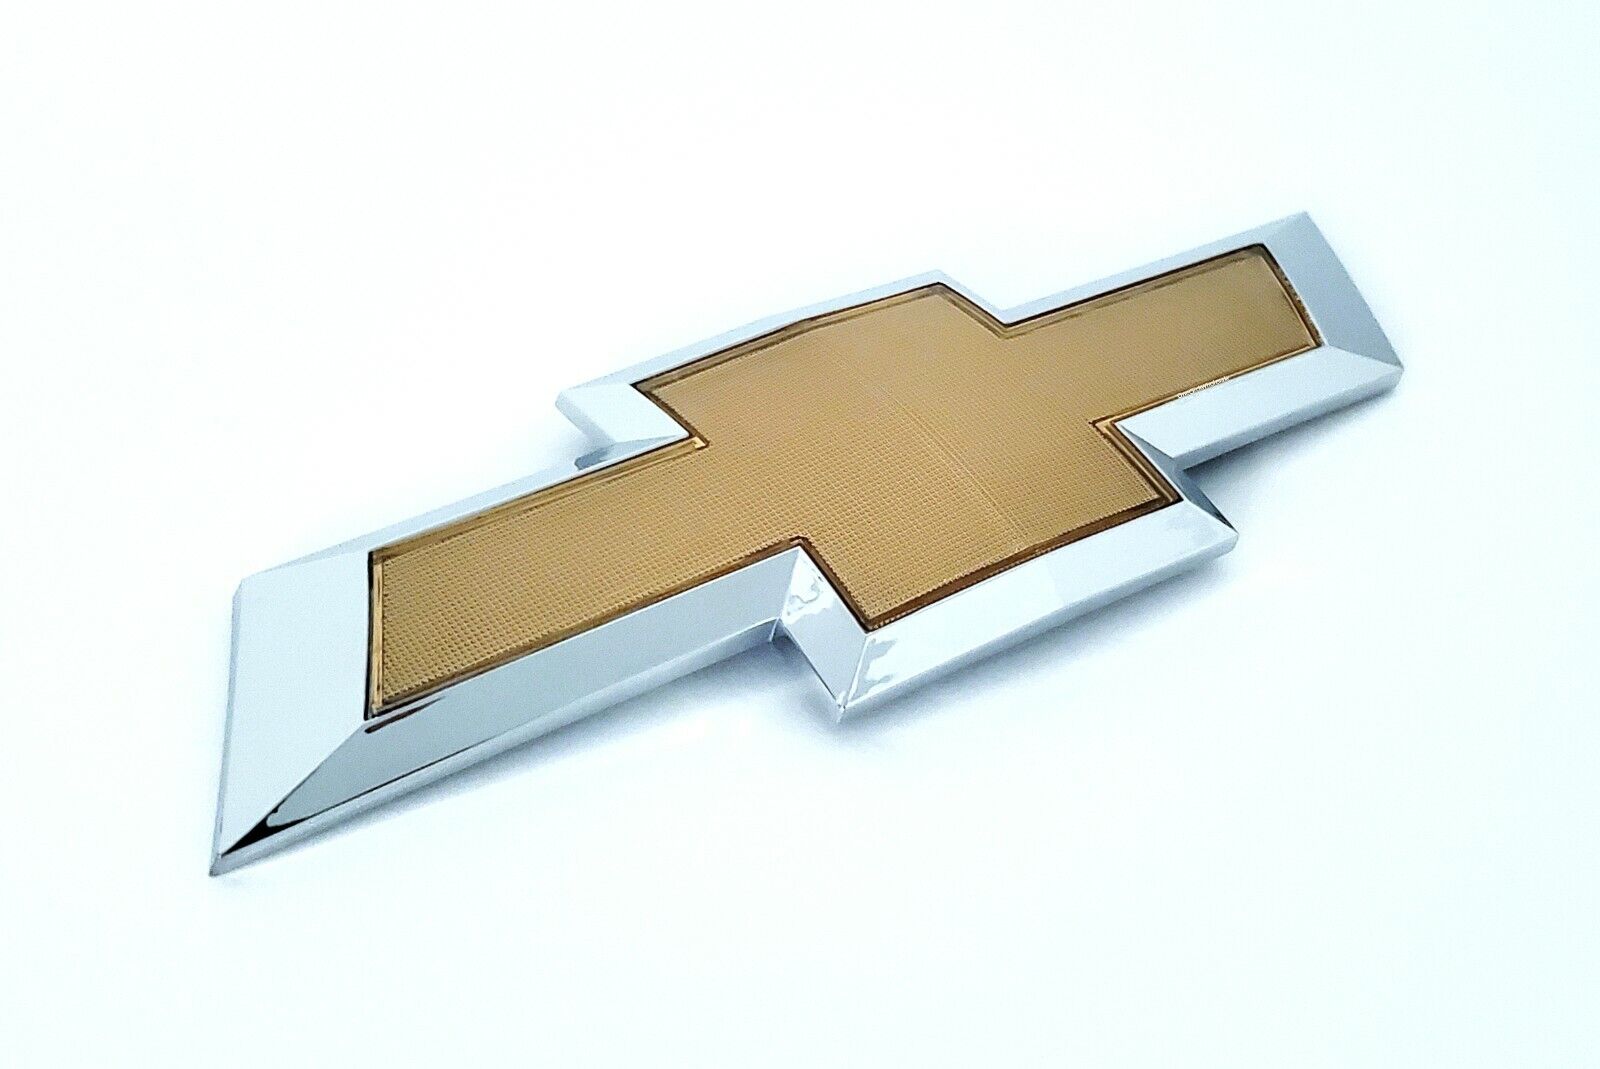 Chevy Cruze 2011-2014 Gold Front Grille Bowtie Emblem US Shipping!